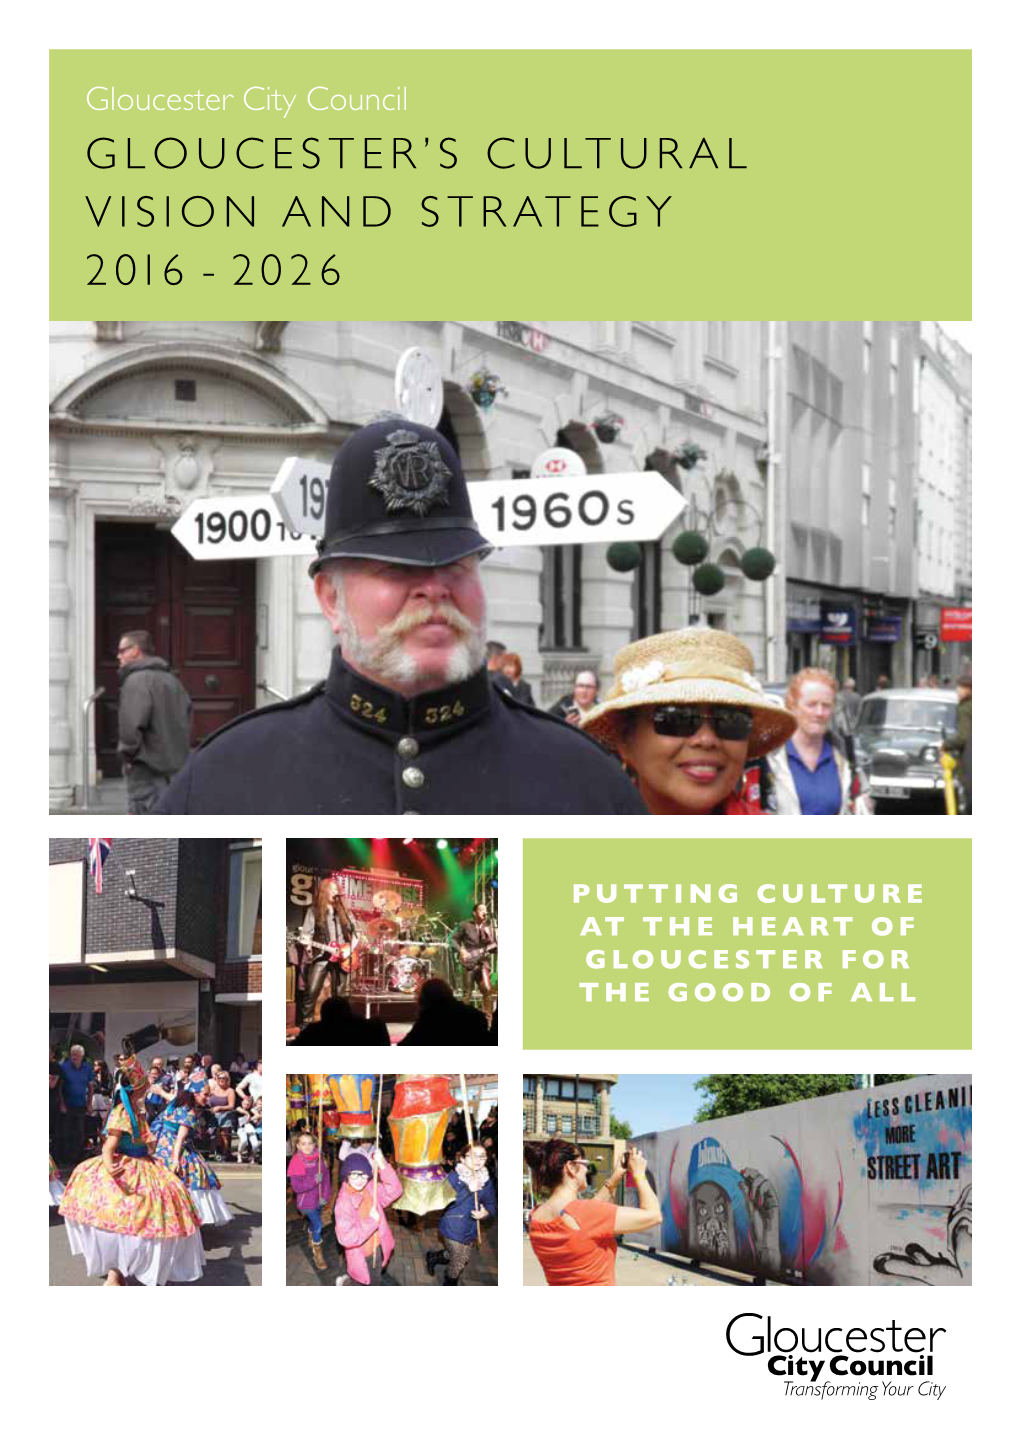 Gloucester's Cultural Vision and Strategy 2016